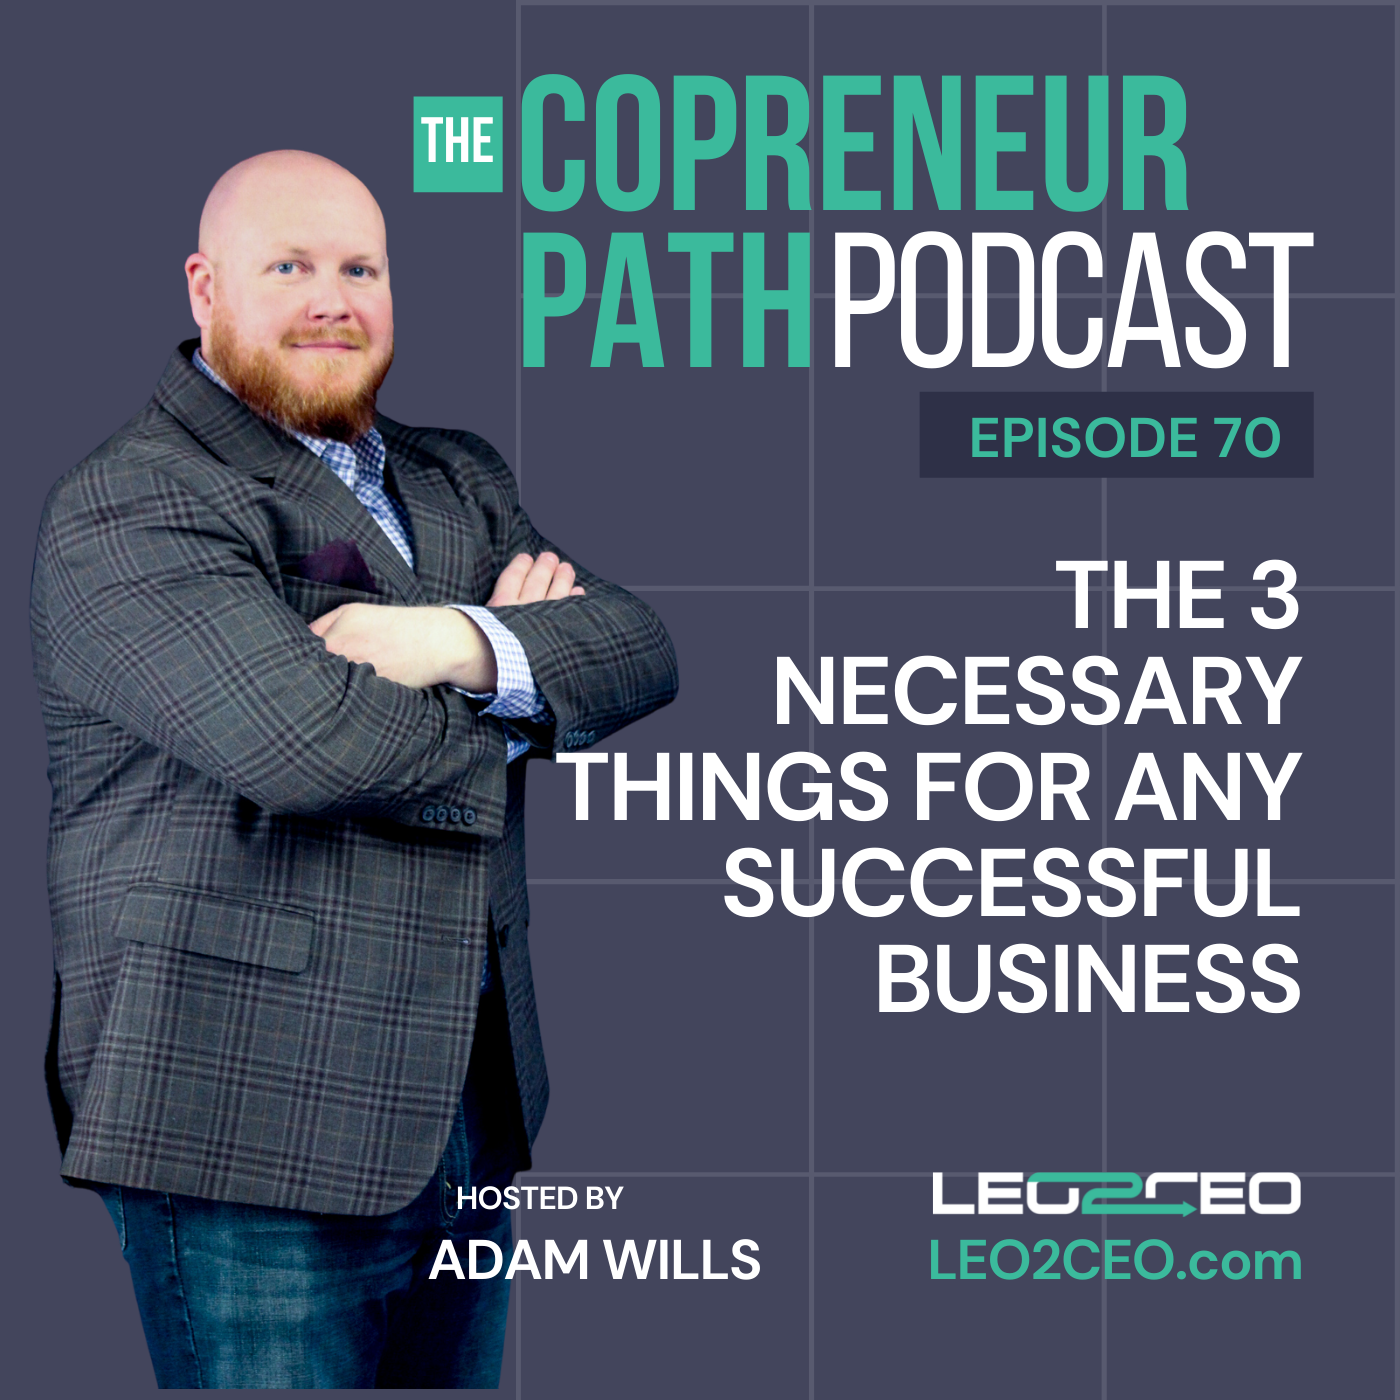 The 3 Necessary Things for Any Successful Business